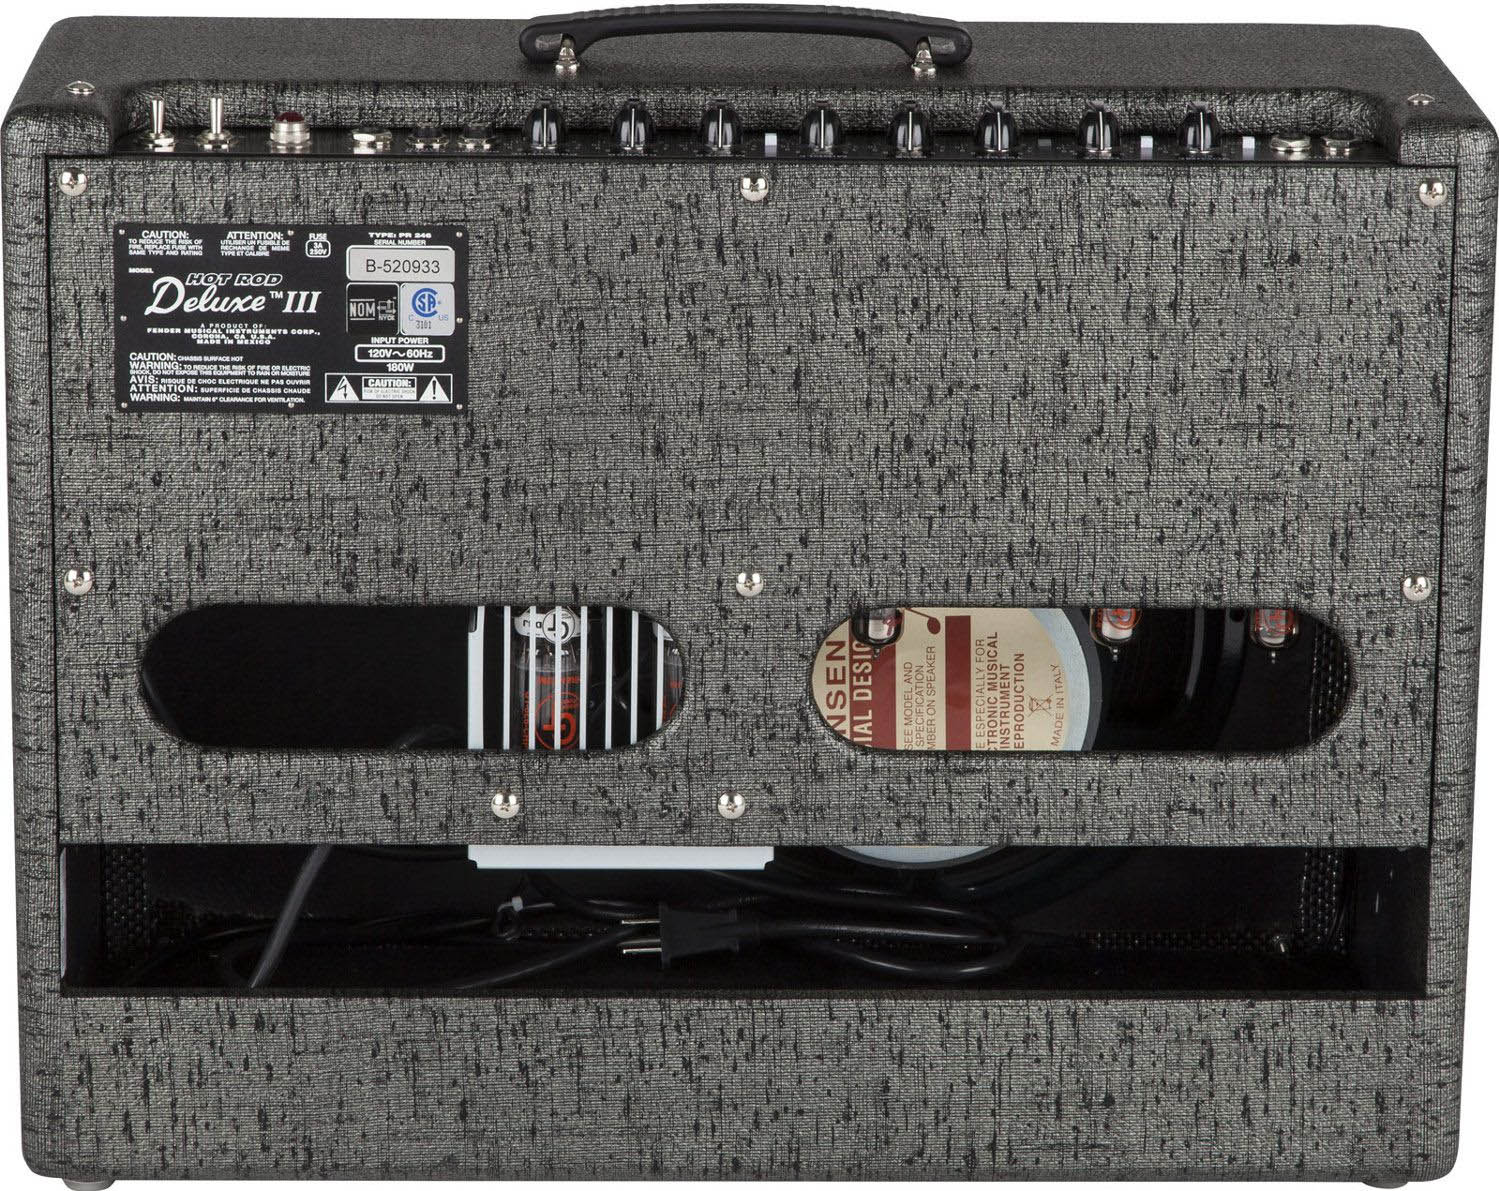 Fender Hot Rod Deluxe Gb George Benson 2012 40w 1x12 Gray Black - Electric guitar combo amp - Variation 1